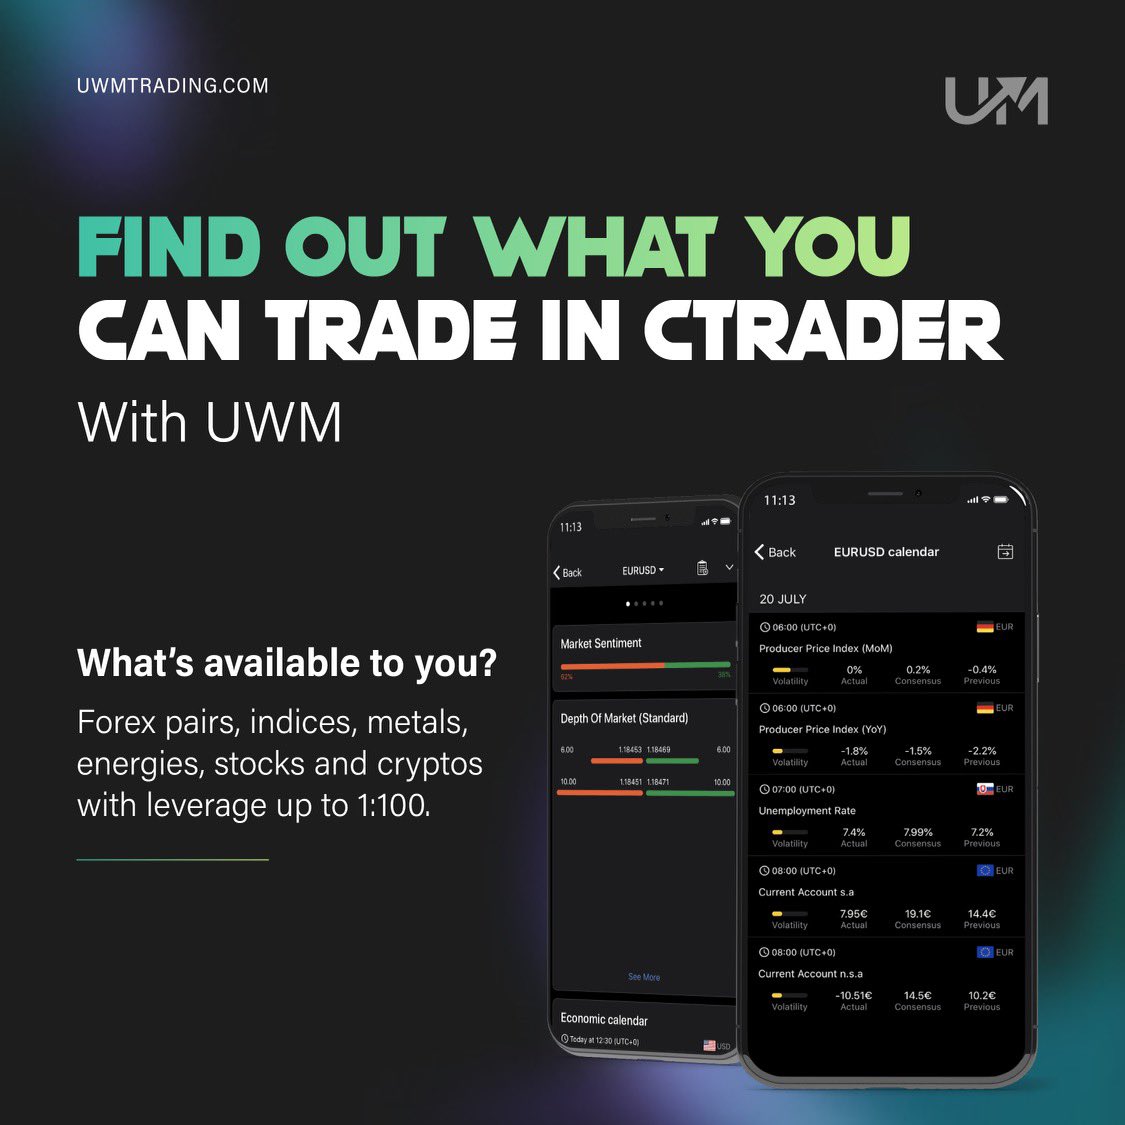 cTrader is a huge success with UWM 
62.2% of traders are with cTrader 💚

uwmtrading.com